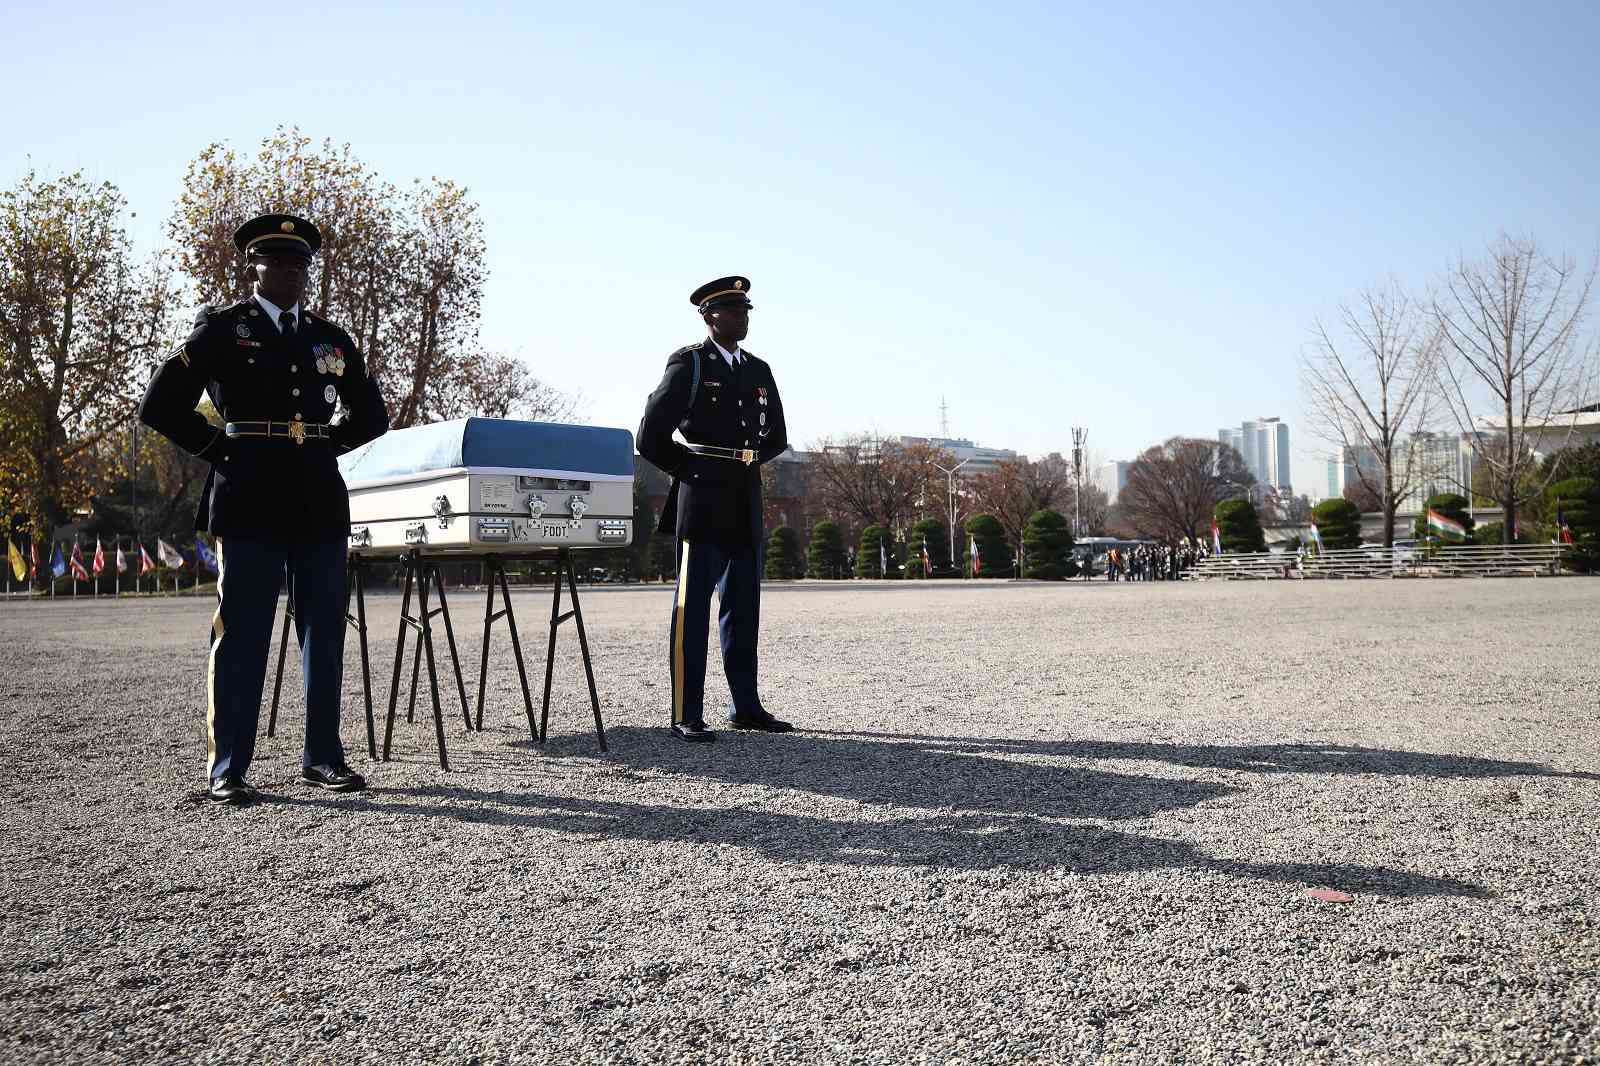 United Nations Command honour guards stand with a coffin that contains the remains of a soldier who fought in the Korean war. Repatriation ceremony, Yangsan US military base, Seoul, 20 November 2018 (Chung Sung-Jun/Getty Images)